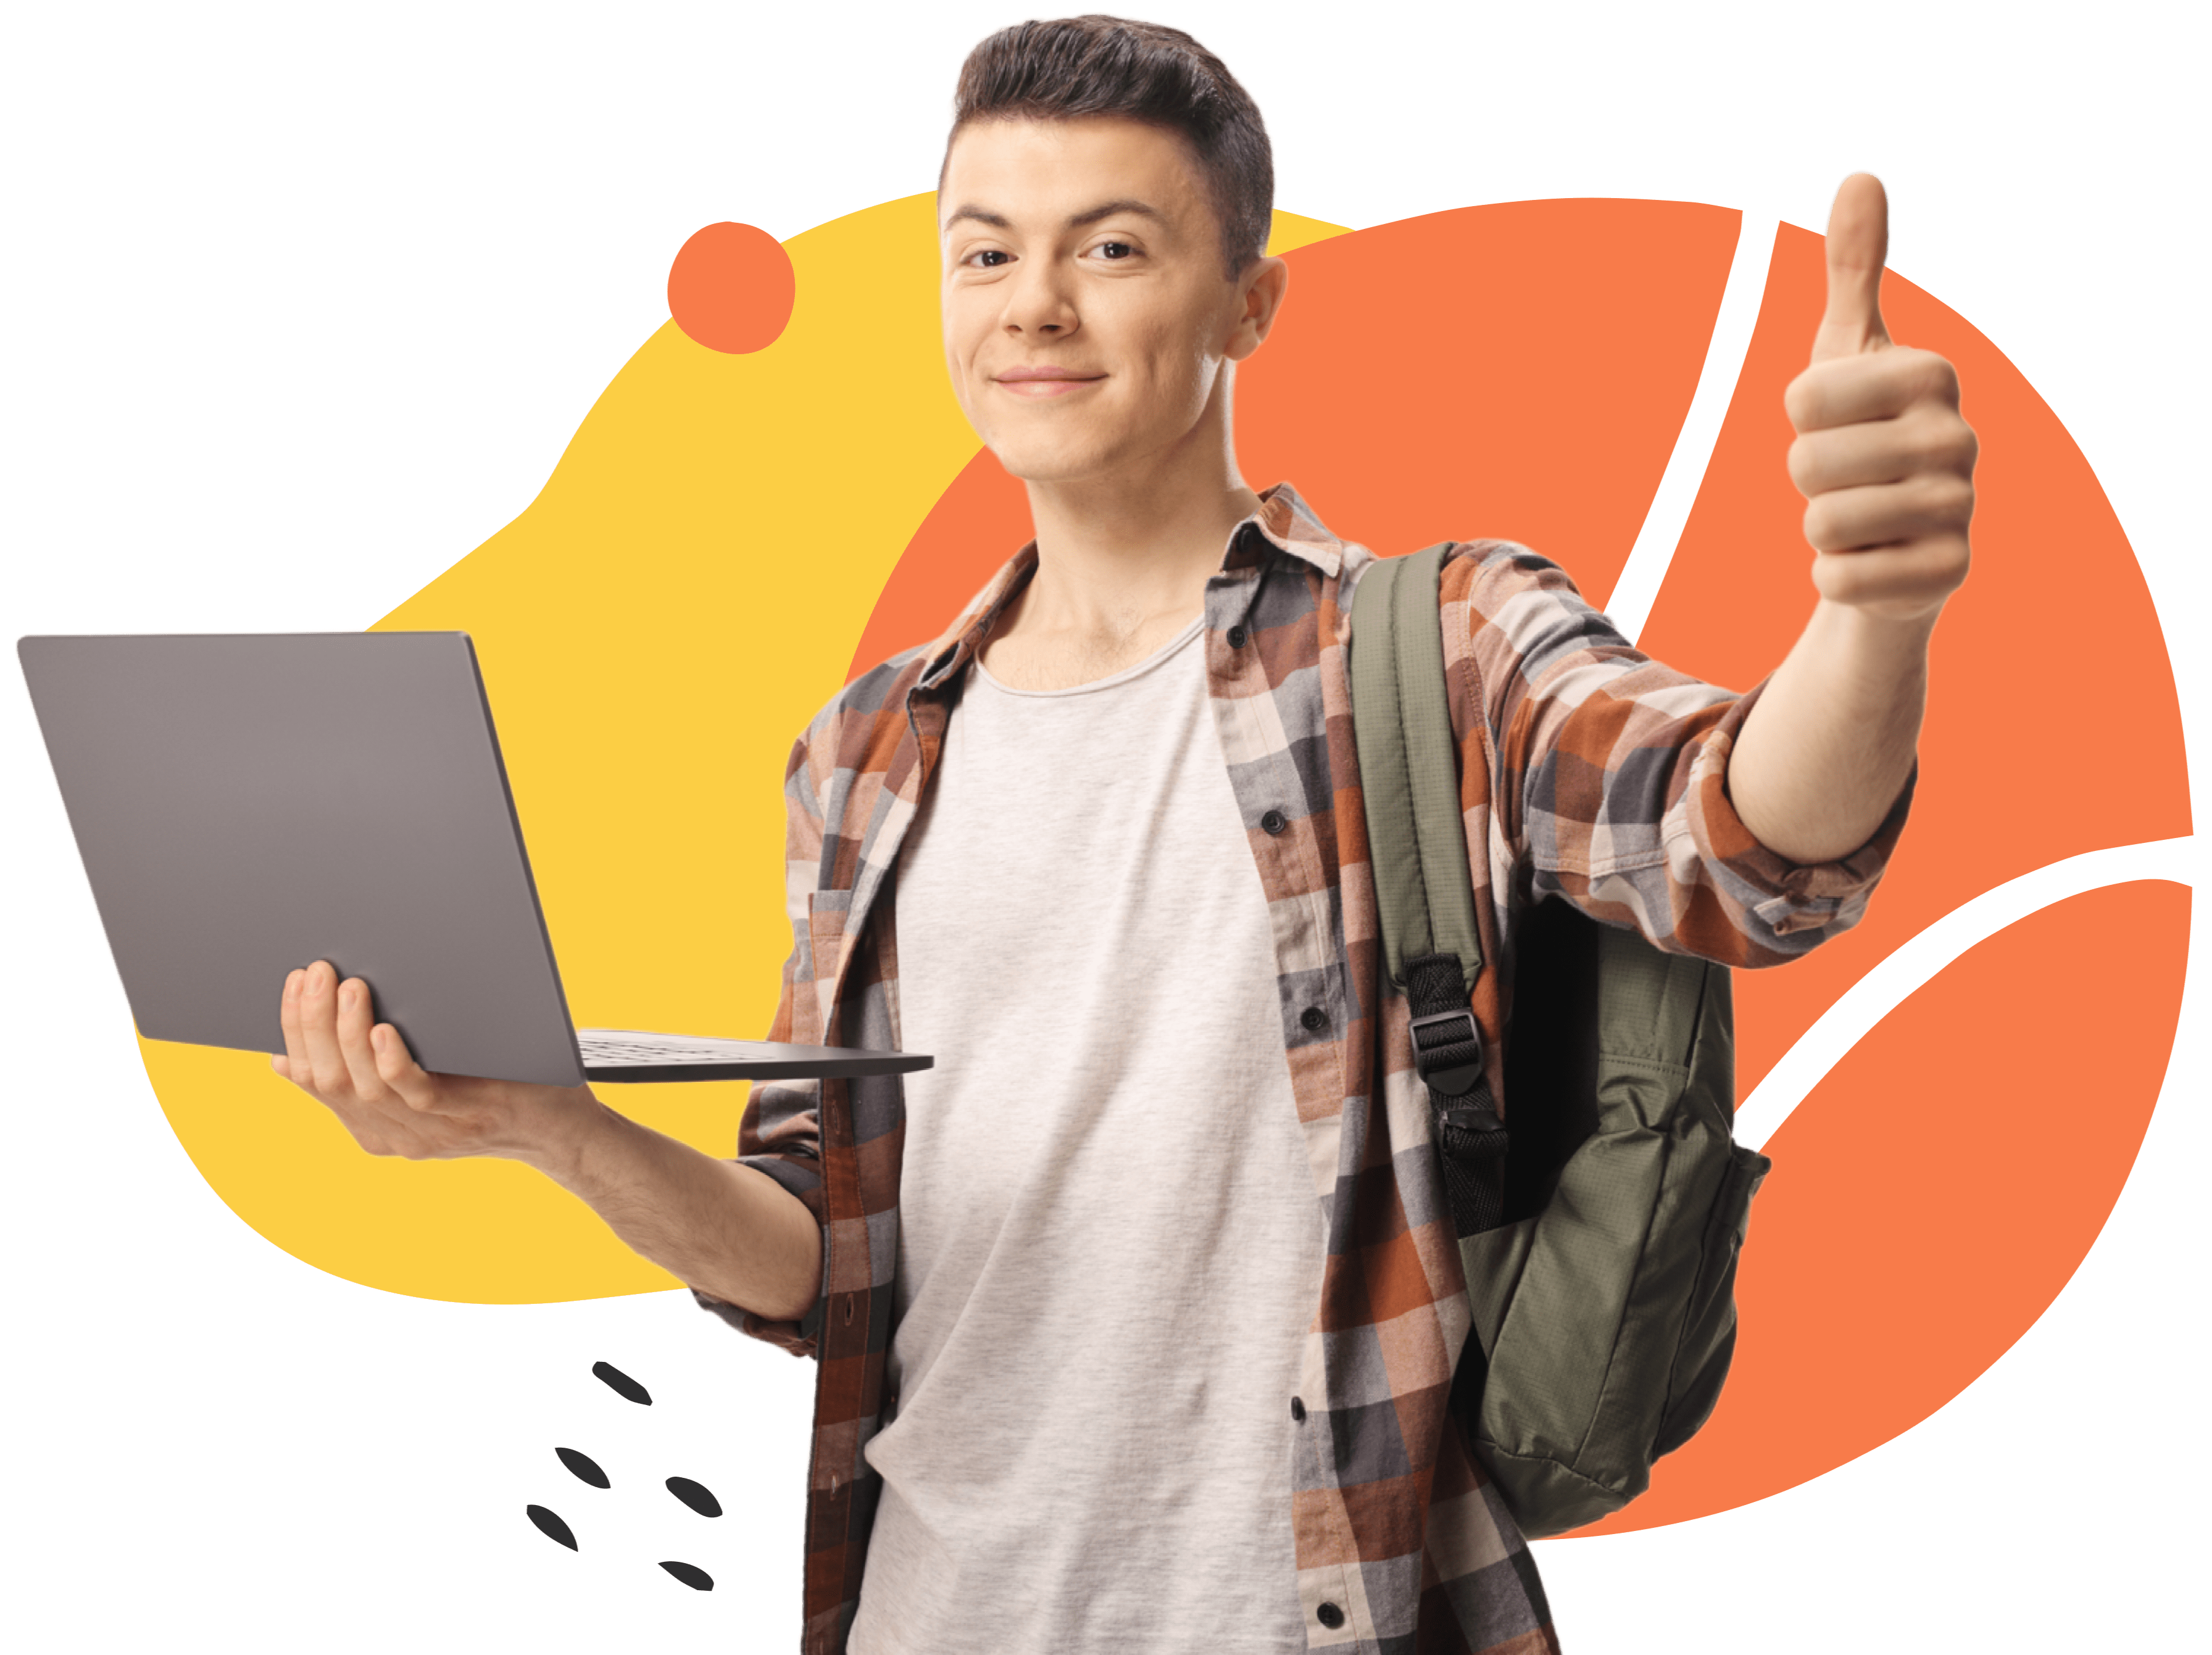 Boosts the chances of winning scholarships with ScholarshipOwl